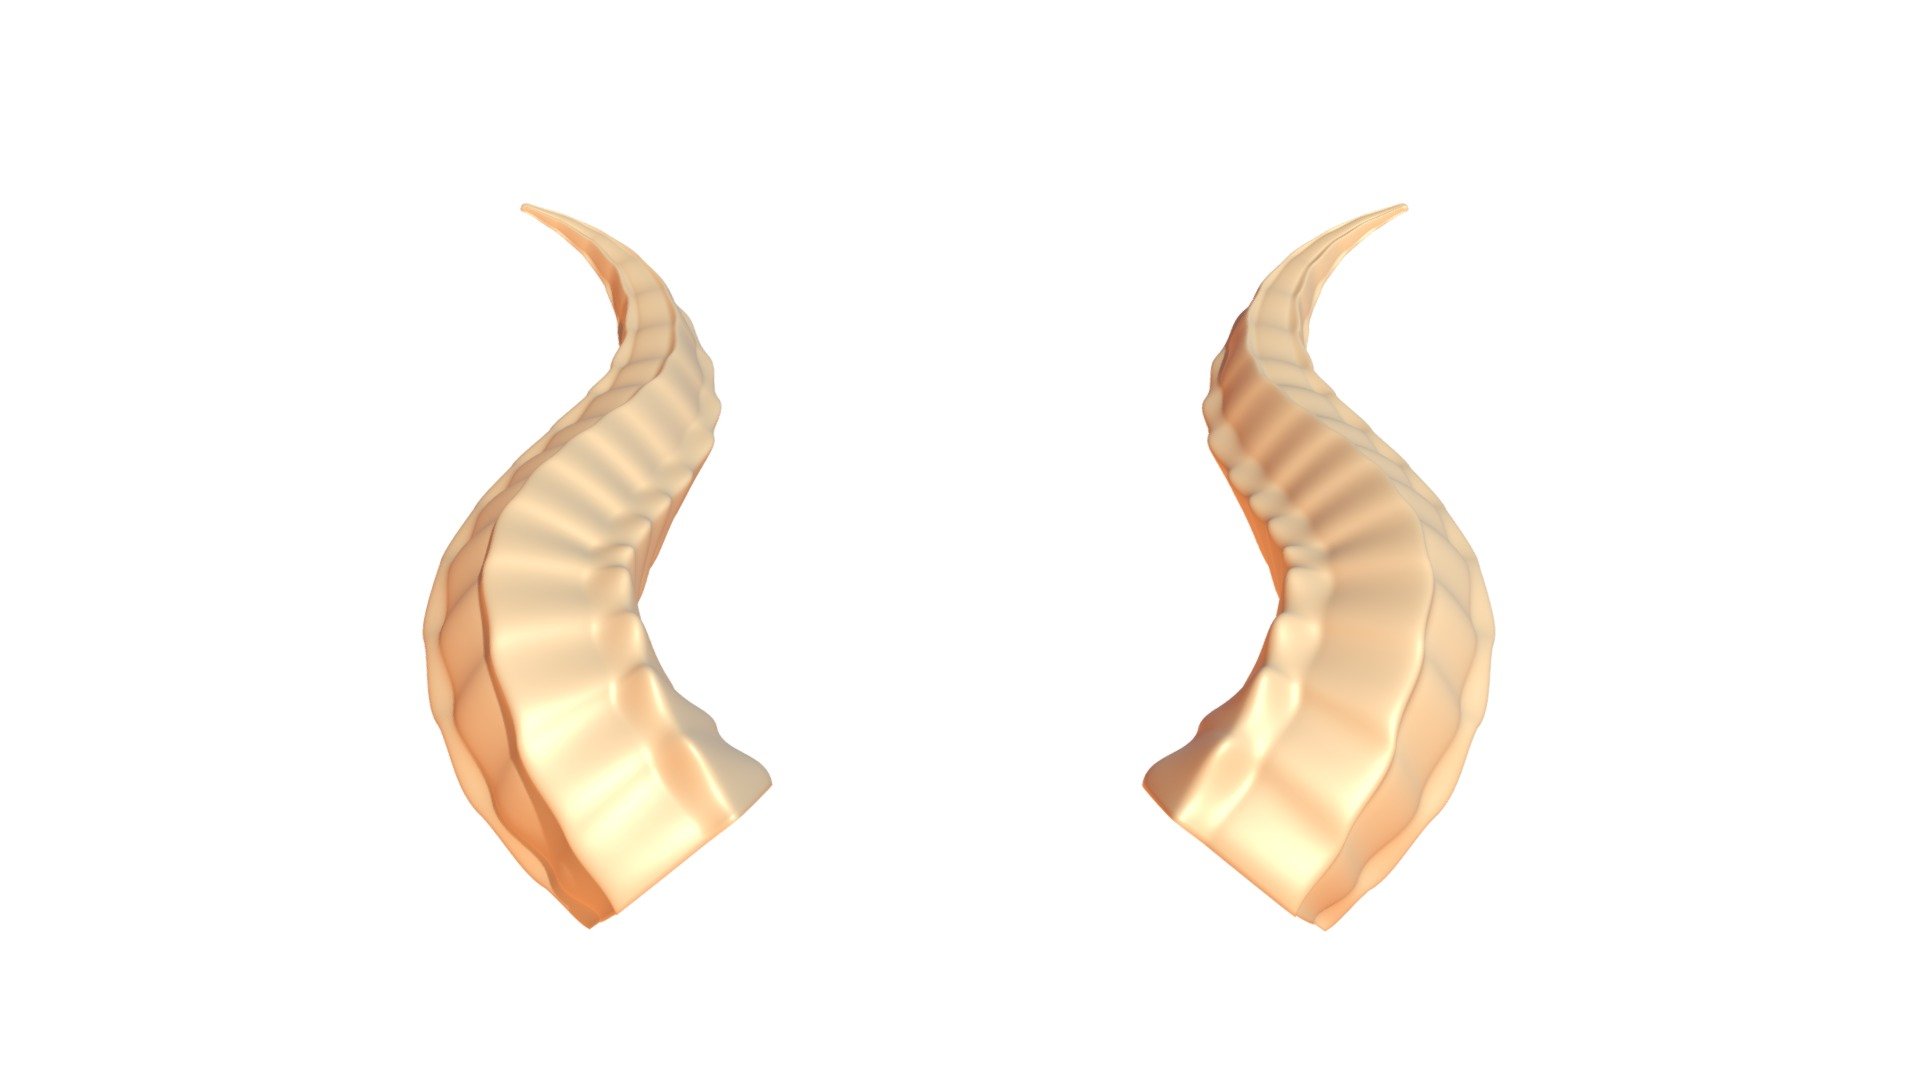 High poly model of horns, ready to be 3D printed and go to hell. Author's work. Size ONE horn: 57 x 130 x 114 mm. Volume: 85 cm3. Head place = 50 mm 3d model